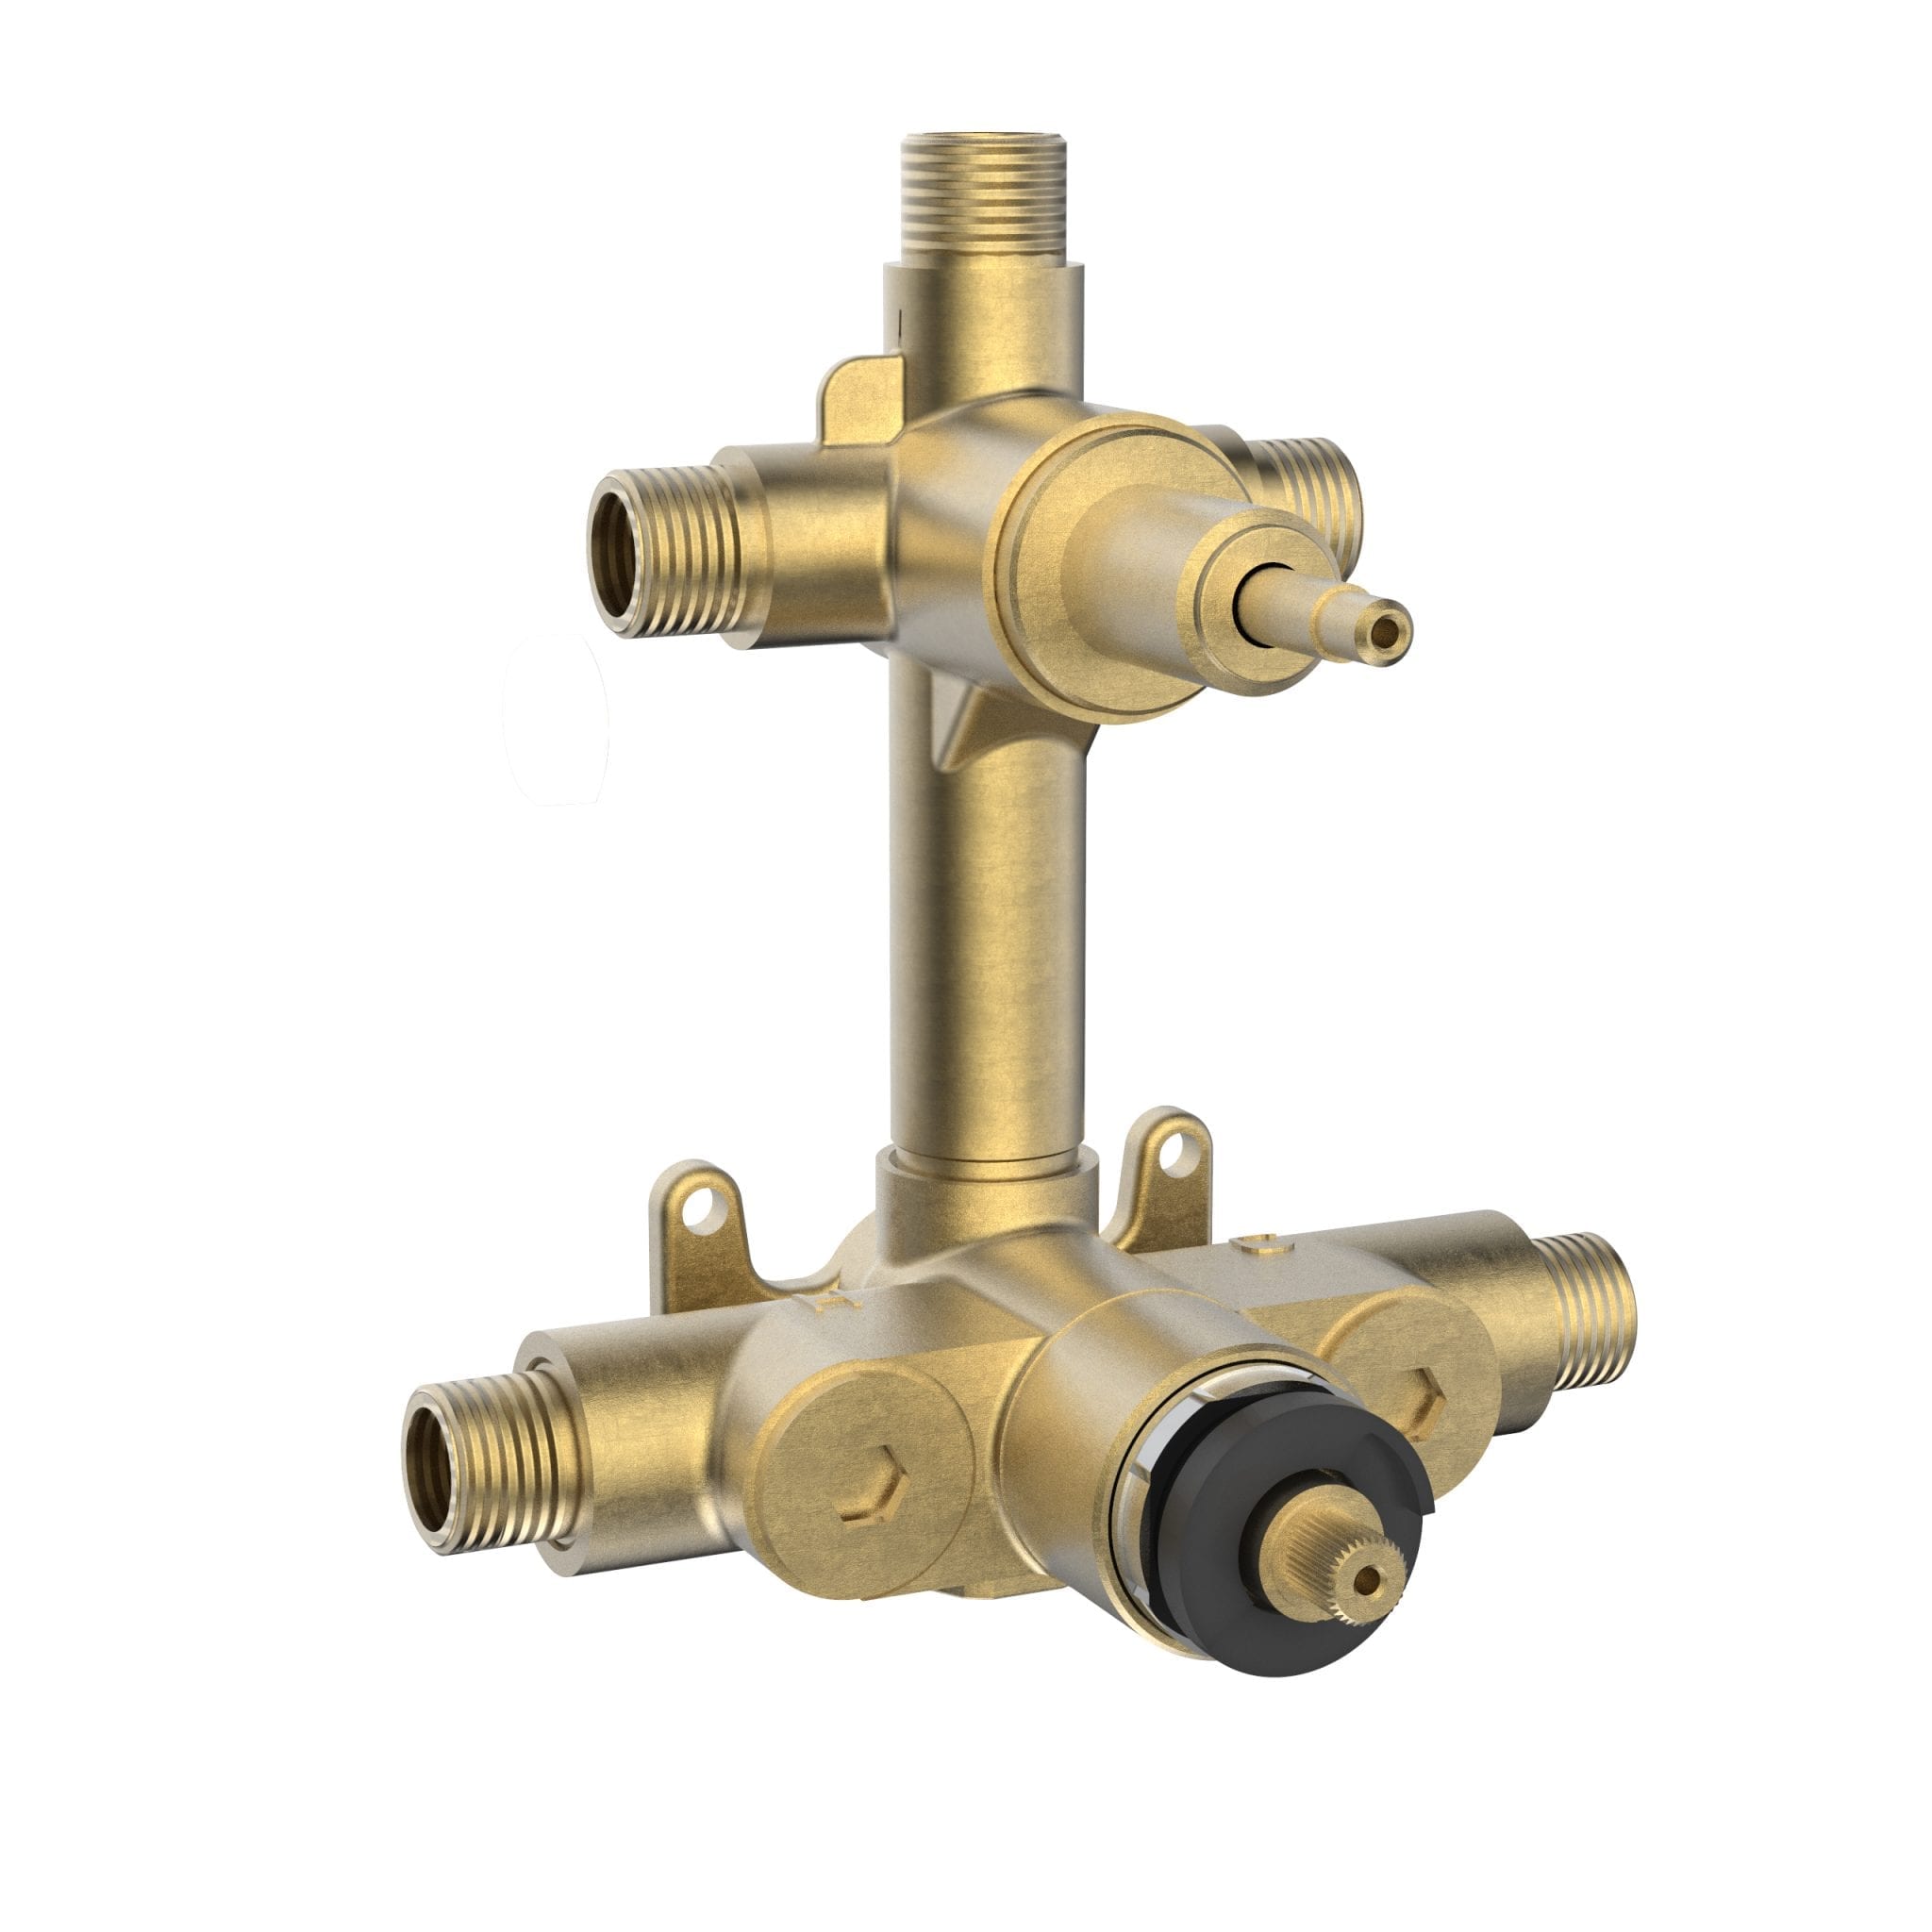 Bélanger 98TSR3- 3-Way Diverter Thermo Valve Rough-In For Copper Connection W/Check Stops